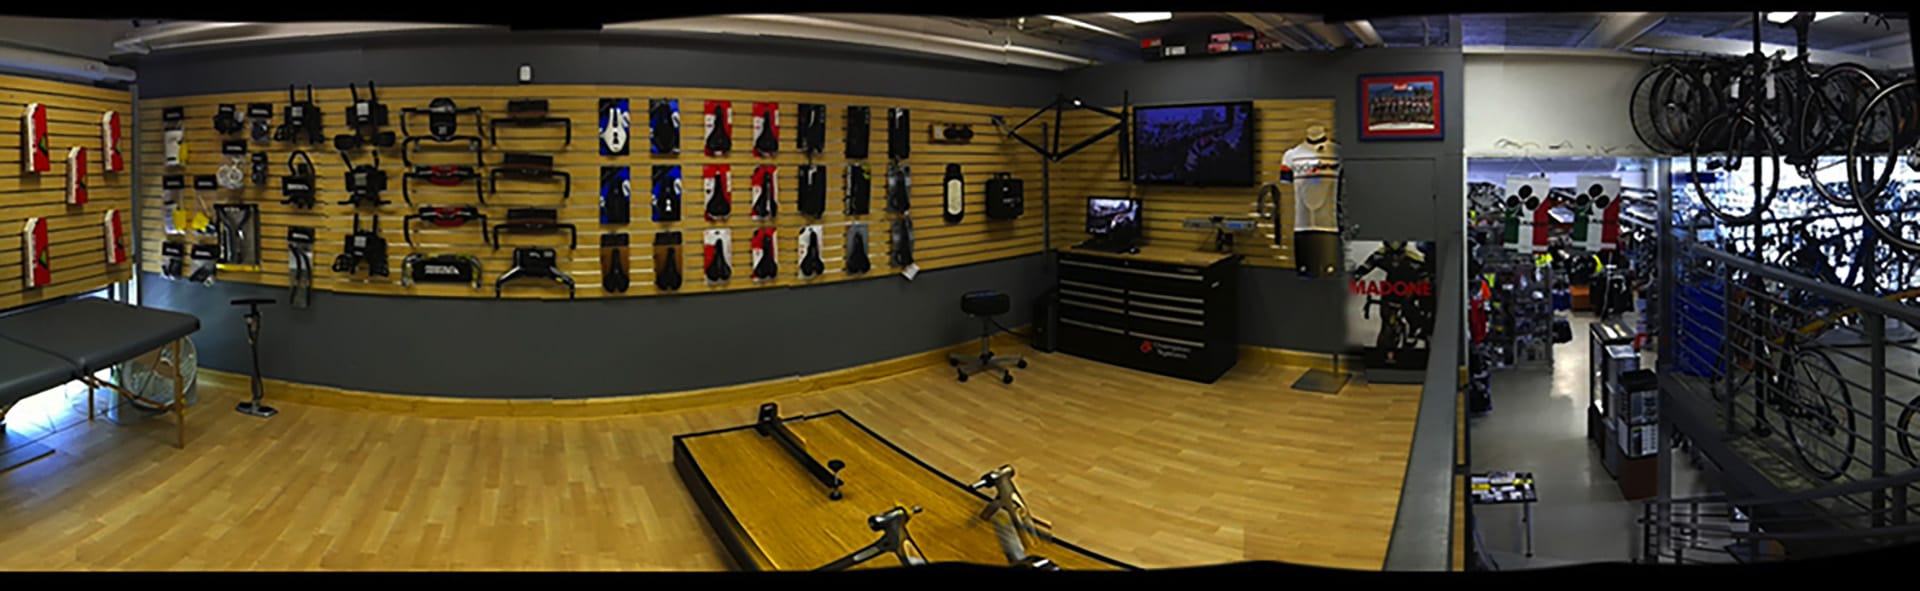 Panorama photo of a bike fitting shop with wood paneled walls and wood floors, elevated from the sales floor on the right.